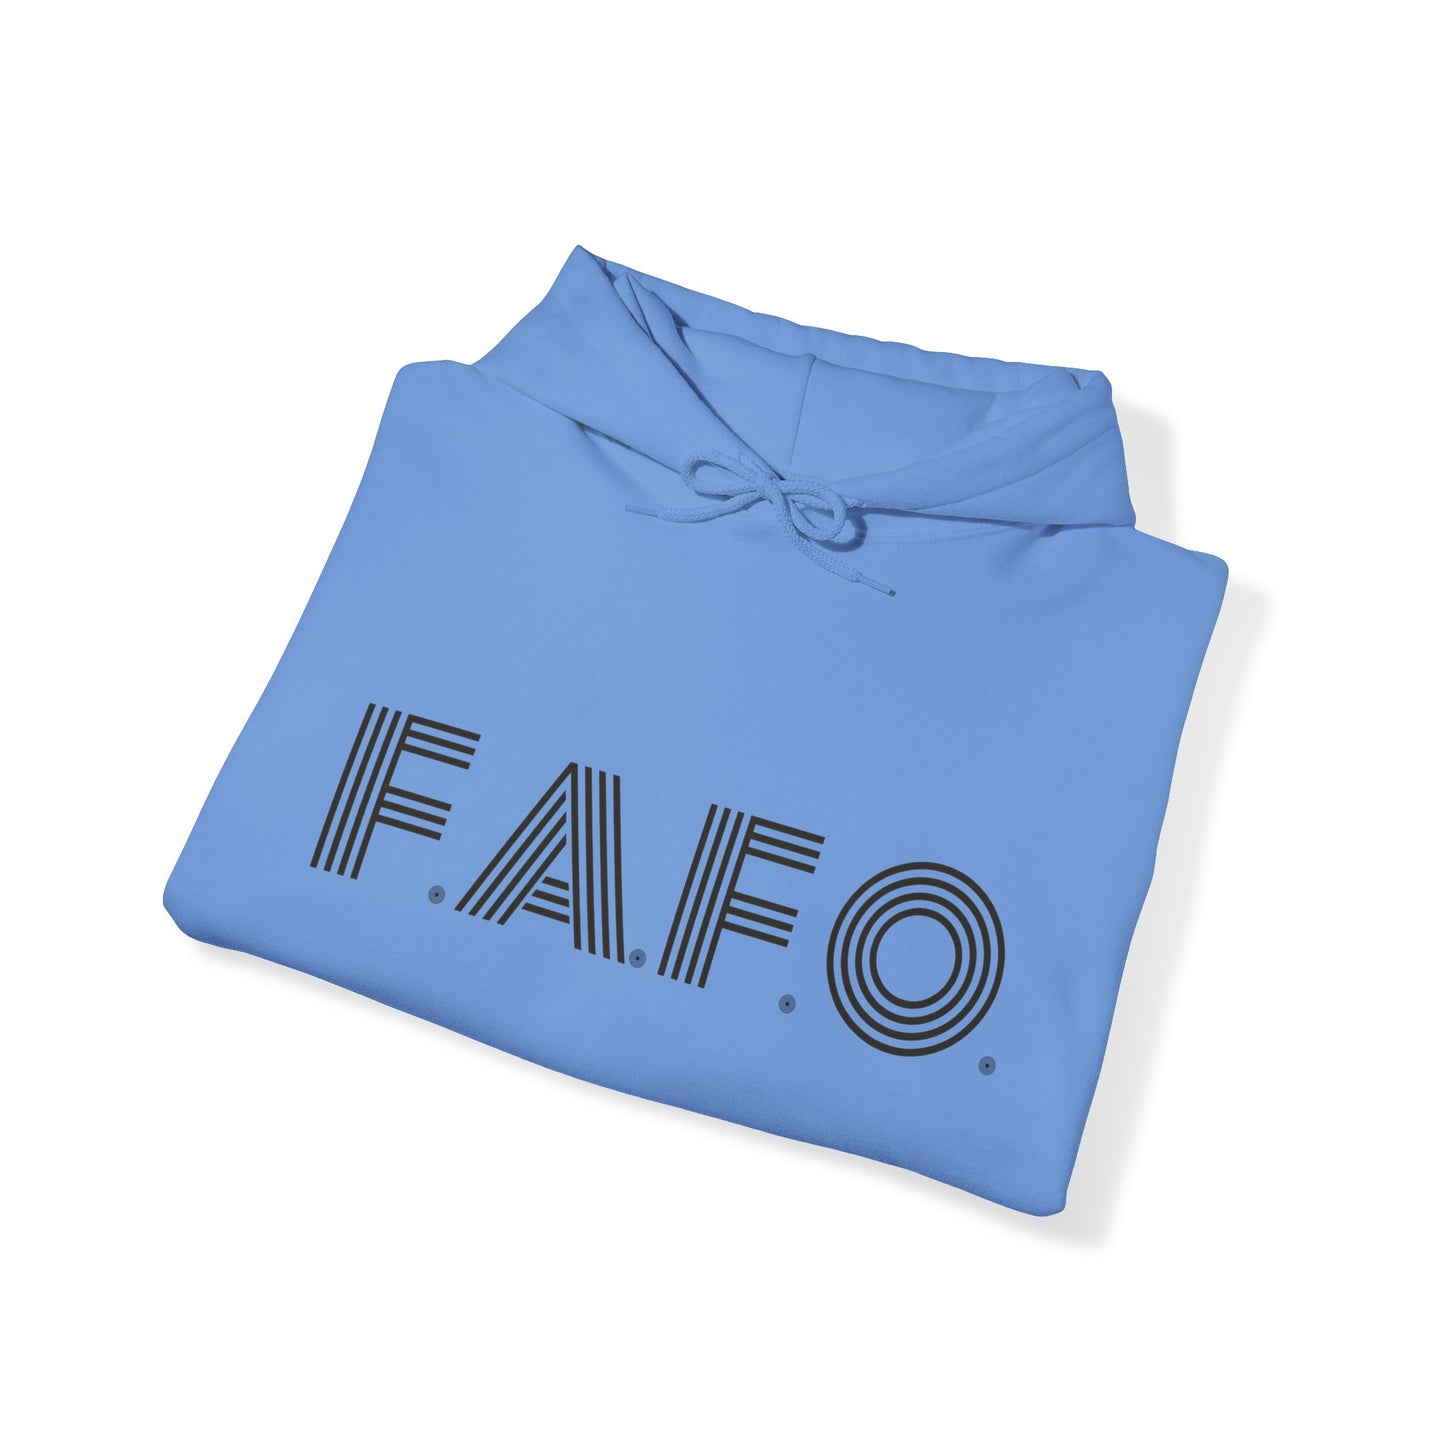 FAFO Hooded Sweatshirt For Sarcastic Humor Hoodie For Just Try It Sweatshirt For Funny Gift Idea